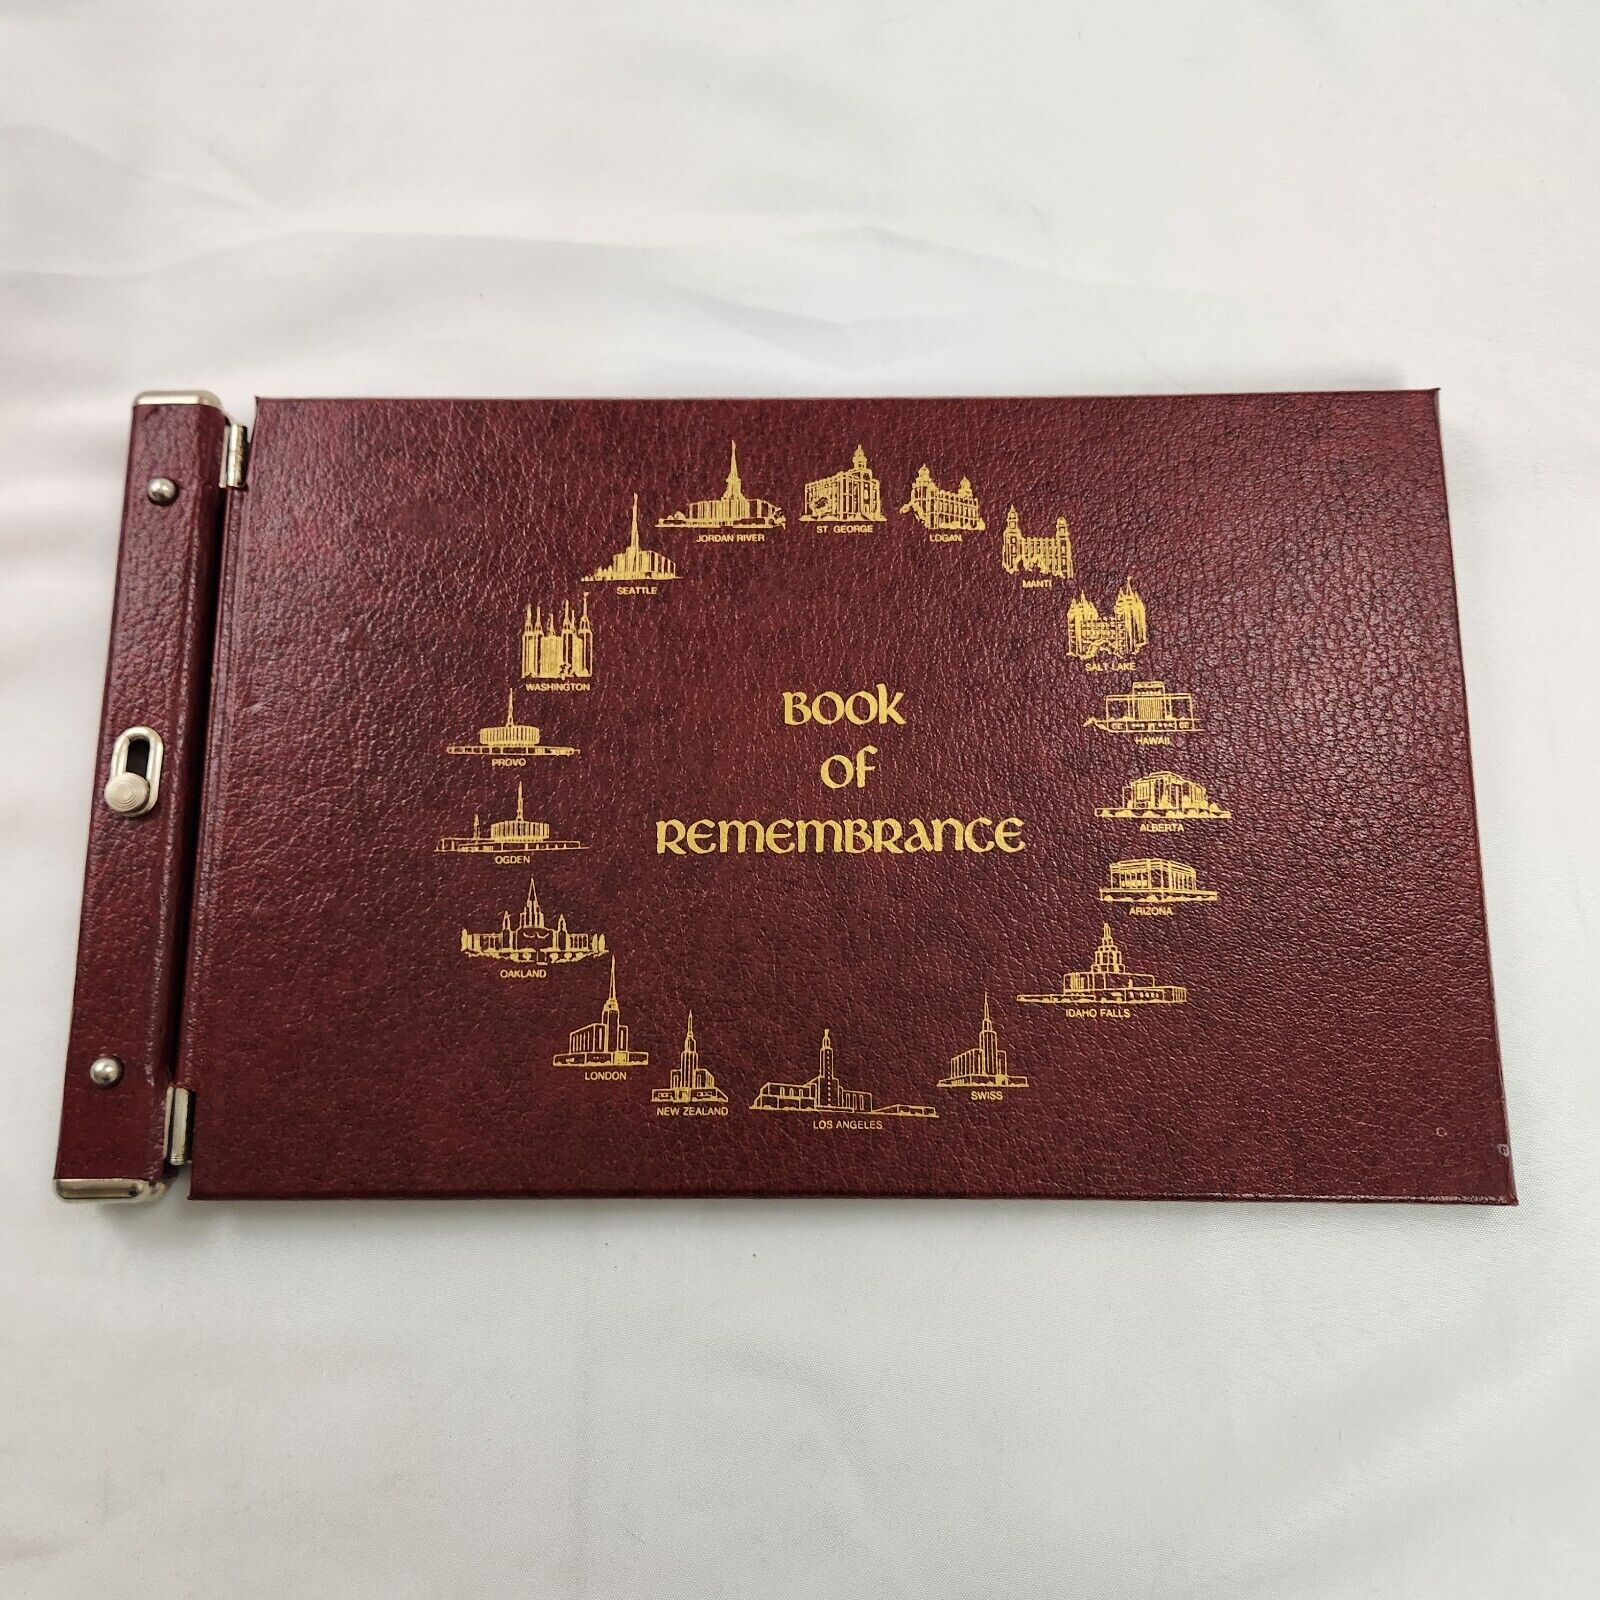 18 Temple Maroon Burgundy Book Of Remembrance Mormon LDS Book Geneaology Tree